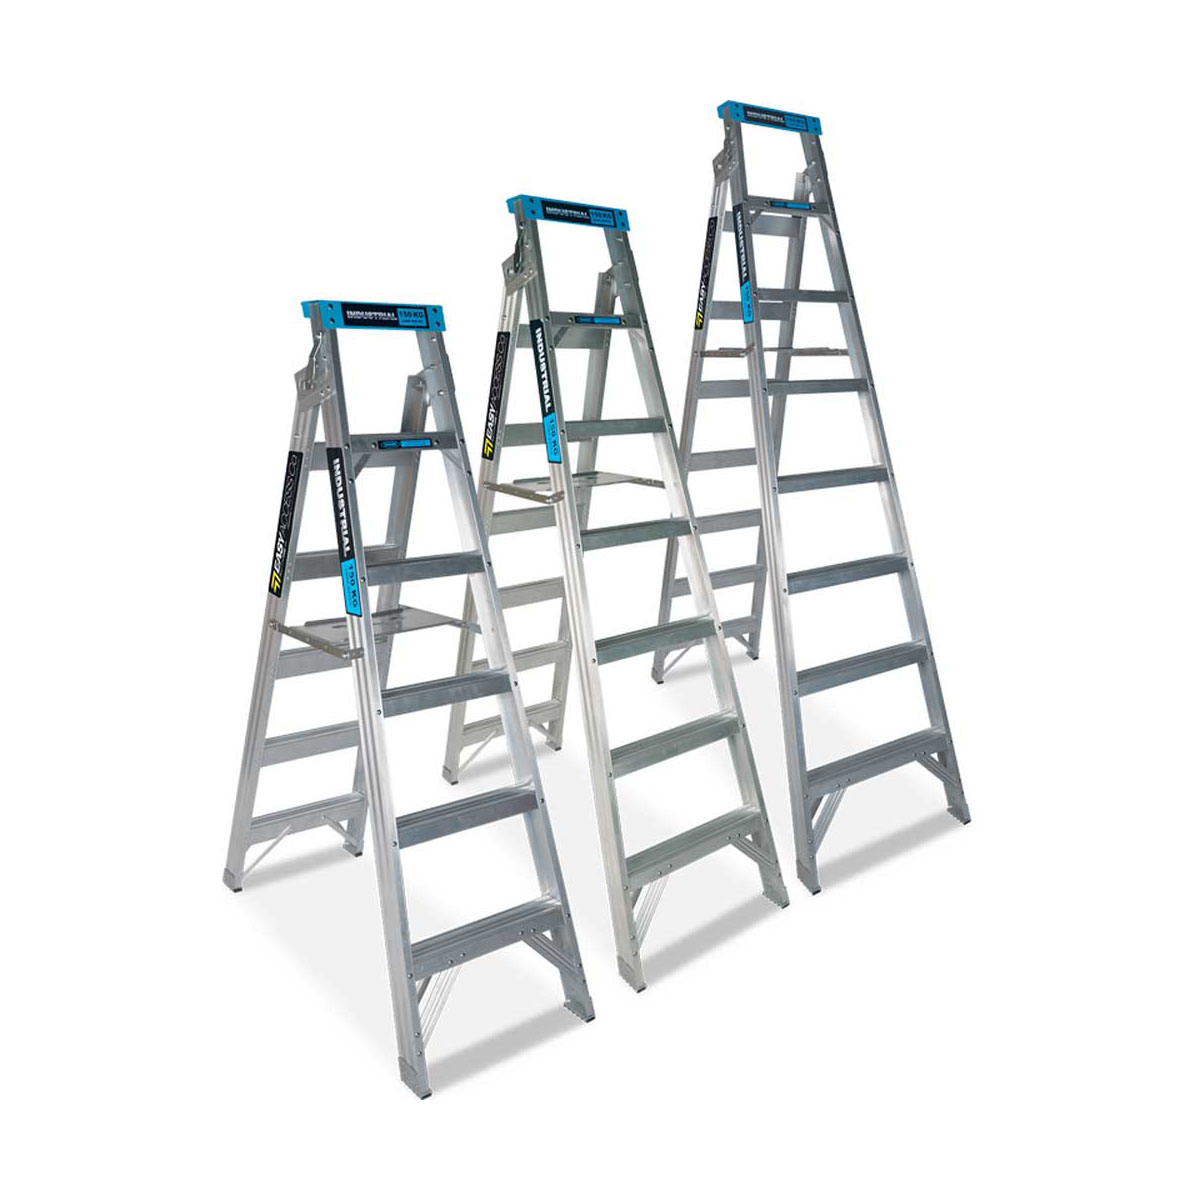 Buy Step-Extension Ladders in Step Ladders from Easy Access available at Astrolift NZ